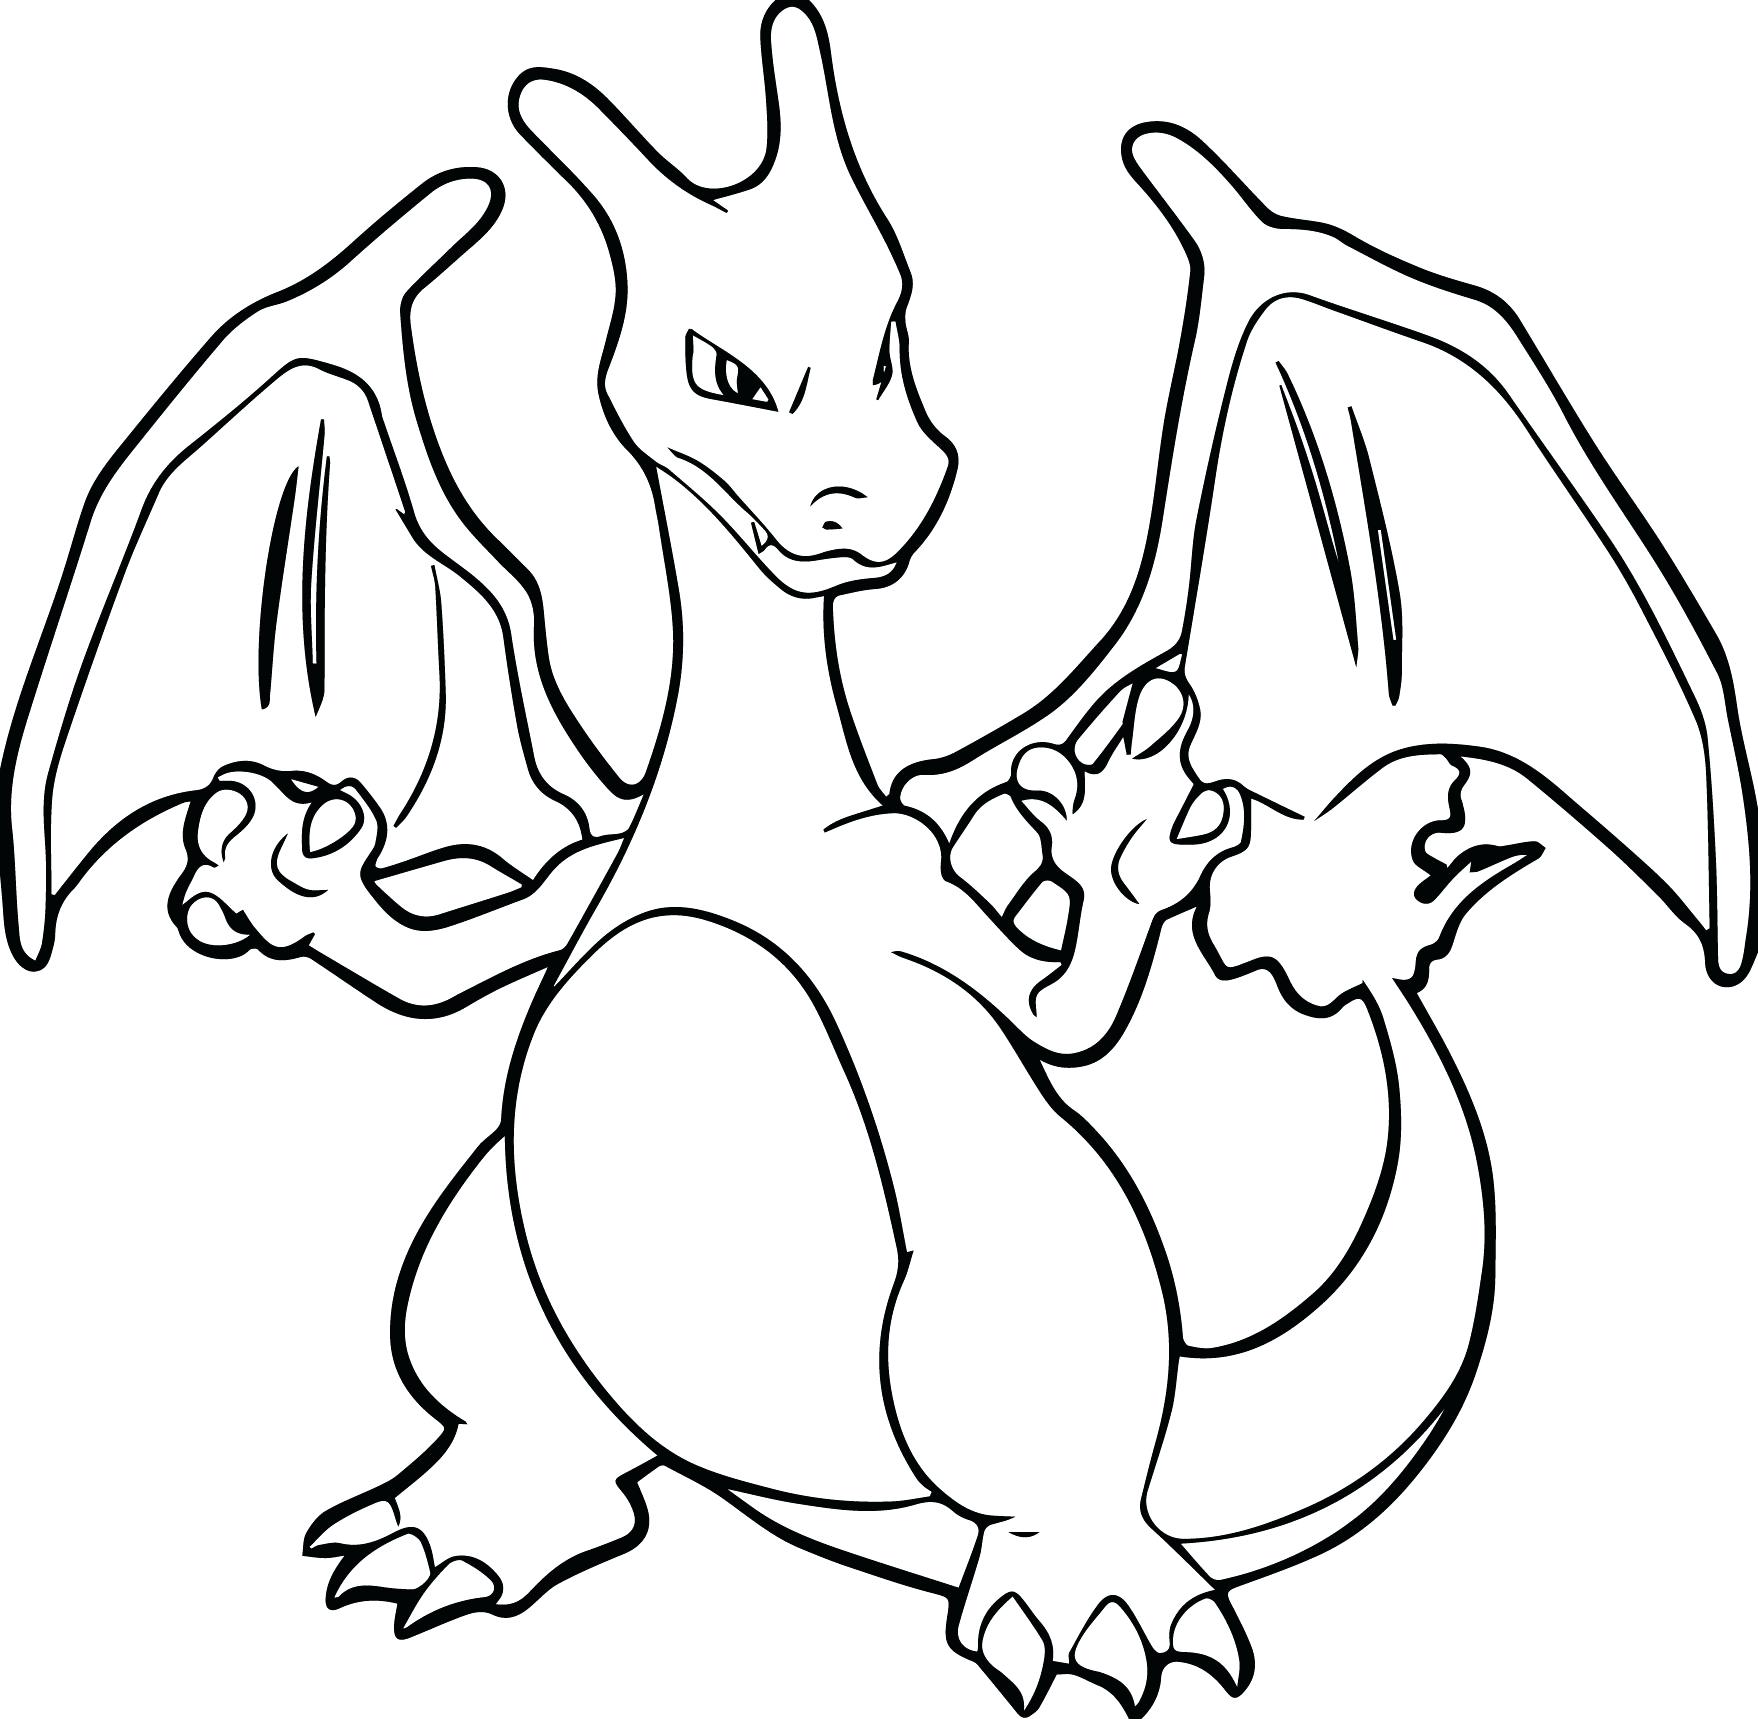 Pokemon Mega Charizard X Coloring Pages At GetColorings Free Printable Colorings Pages To